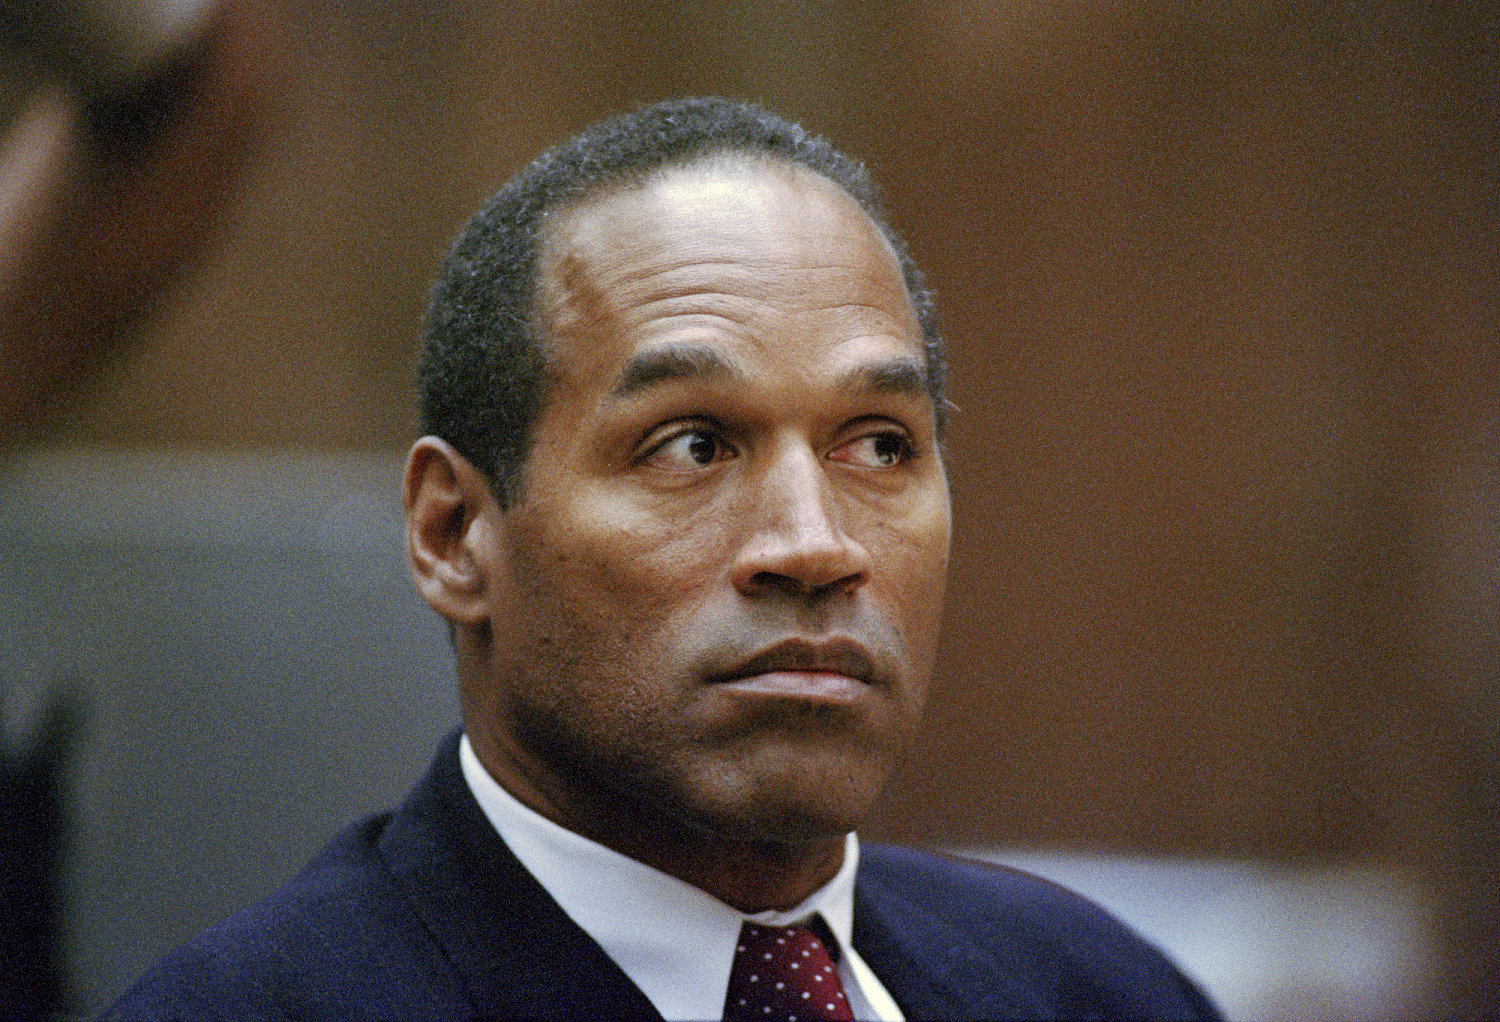 O.J. Simpson, former NFL star whose murder trial captivated the nation, dies at 76